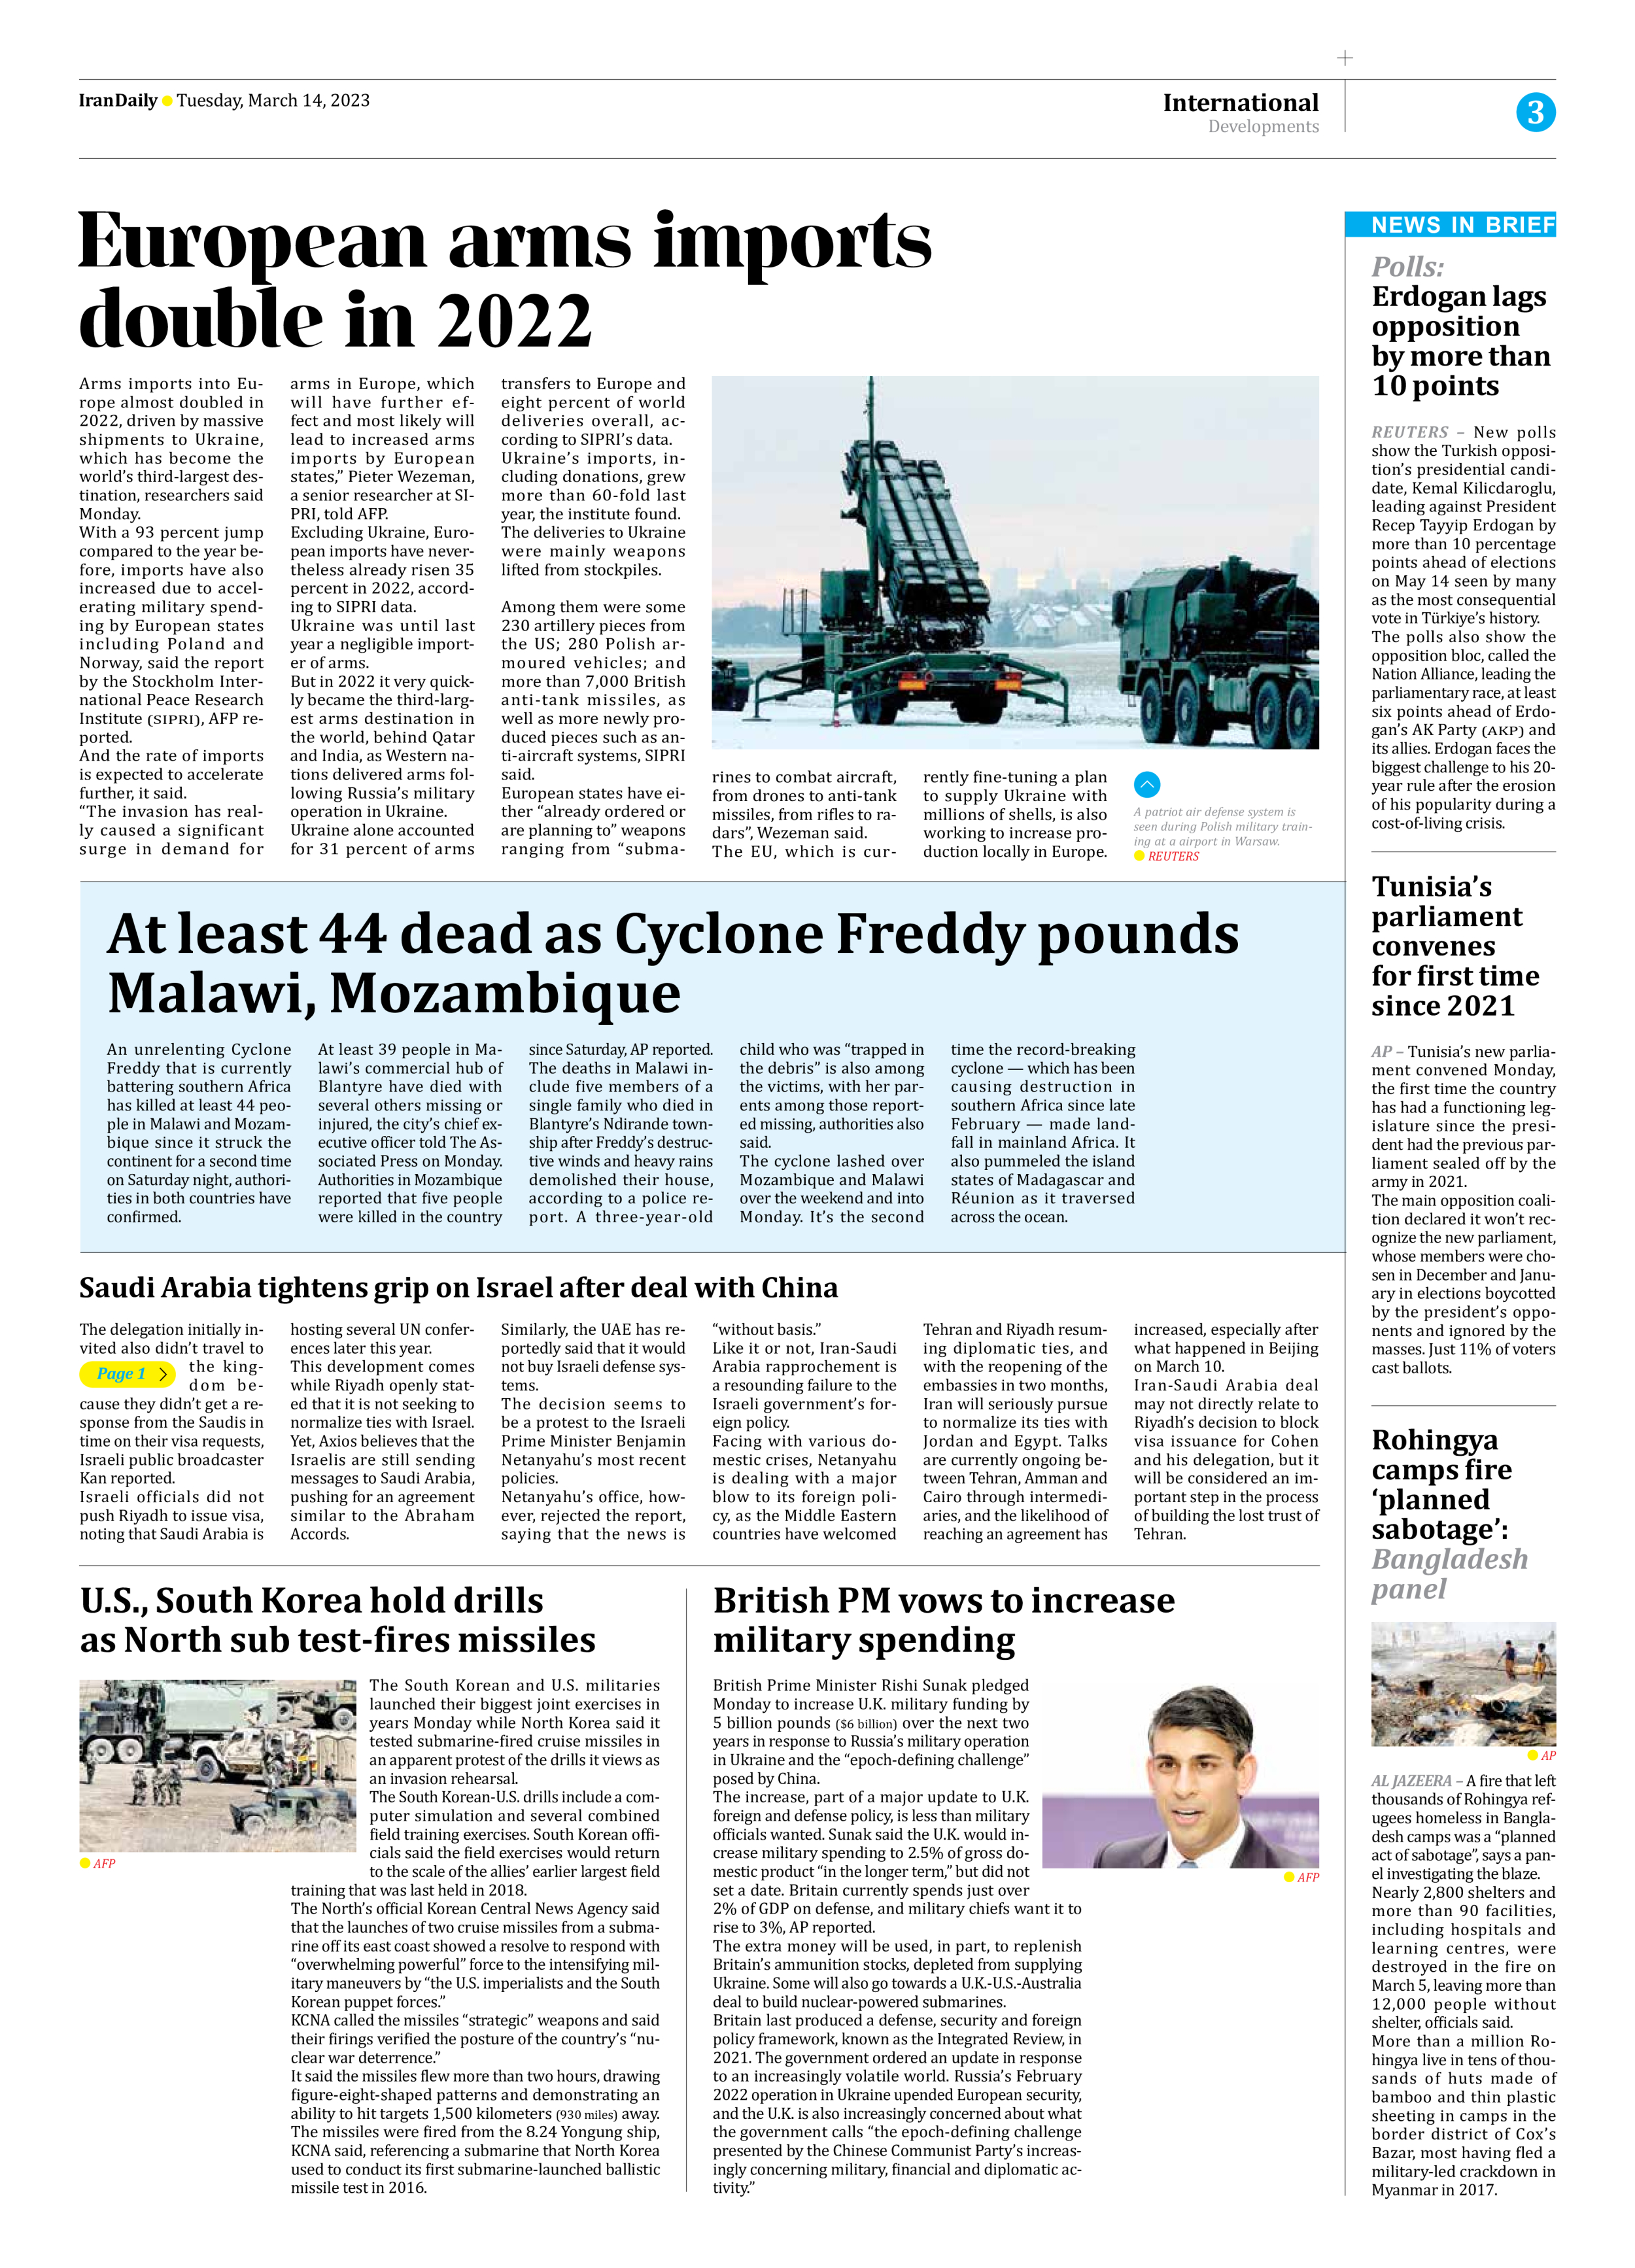 Iran Daily - Number Seven Thousand Two Hundred and Fifty Seven - 14 March 2023 - Page 3